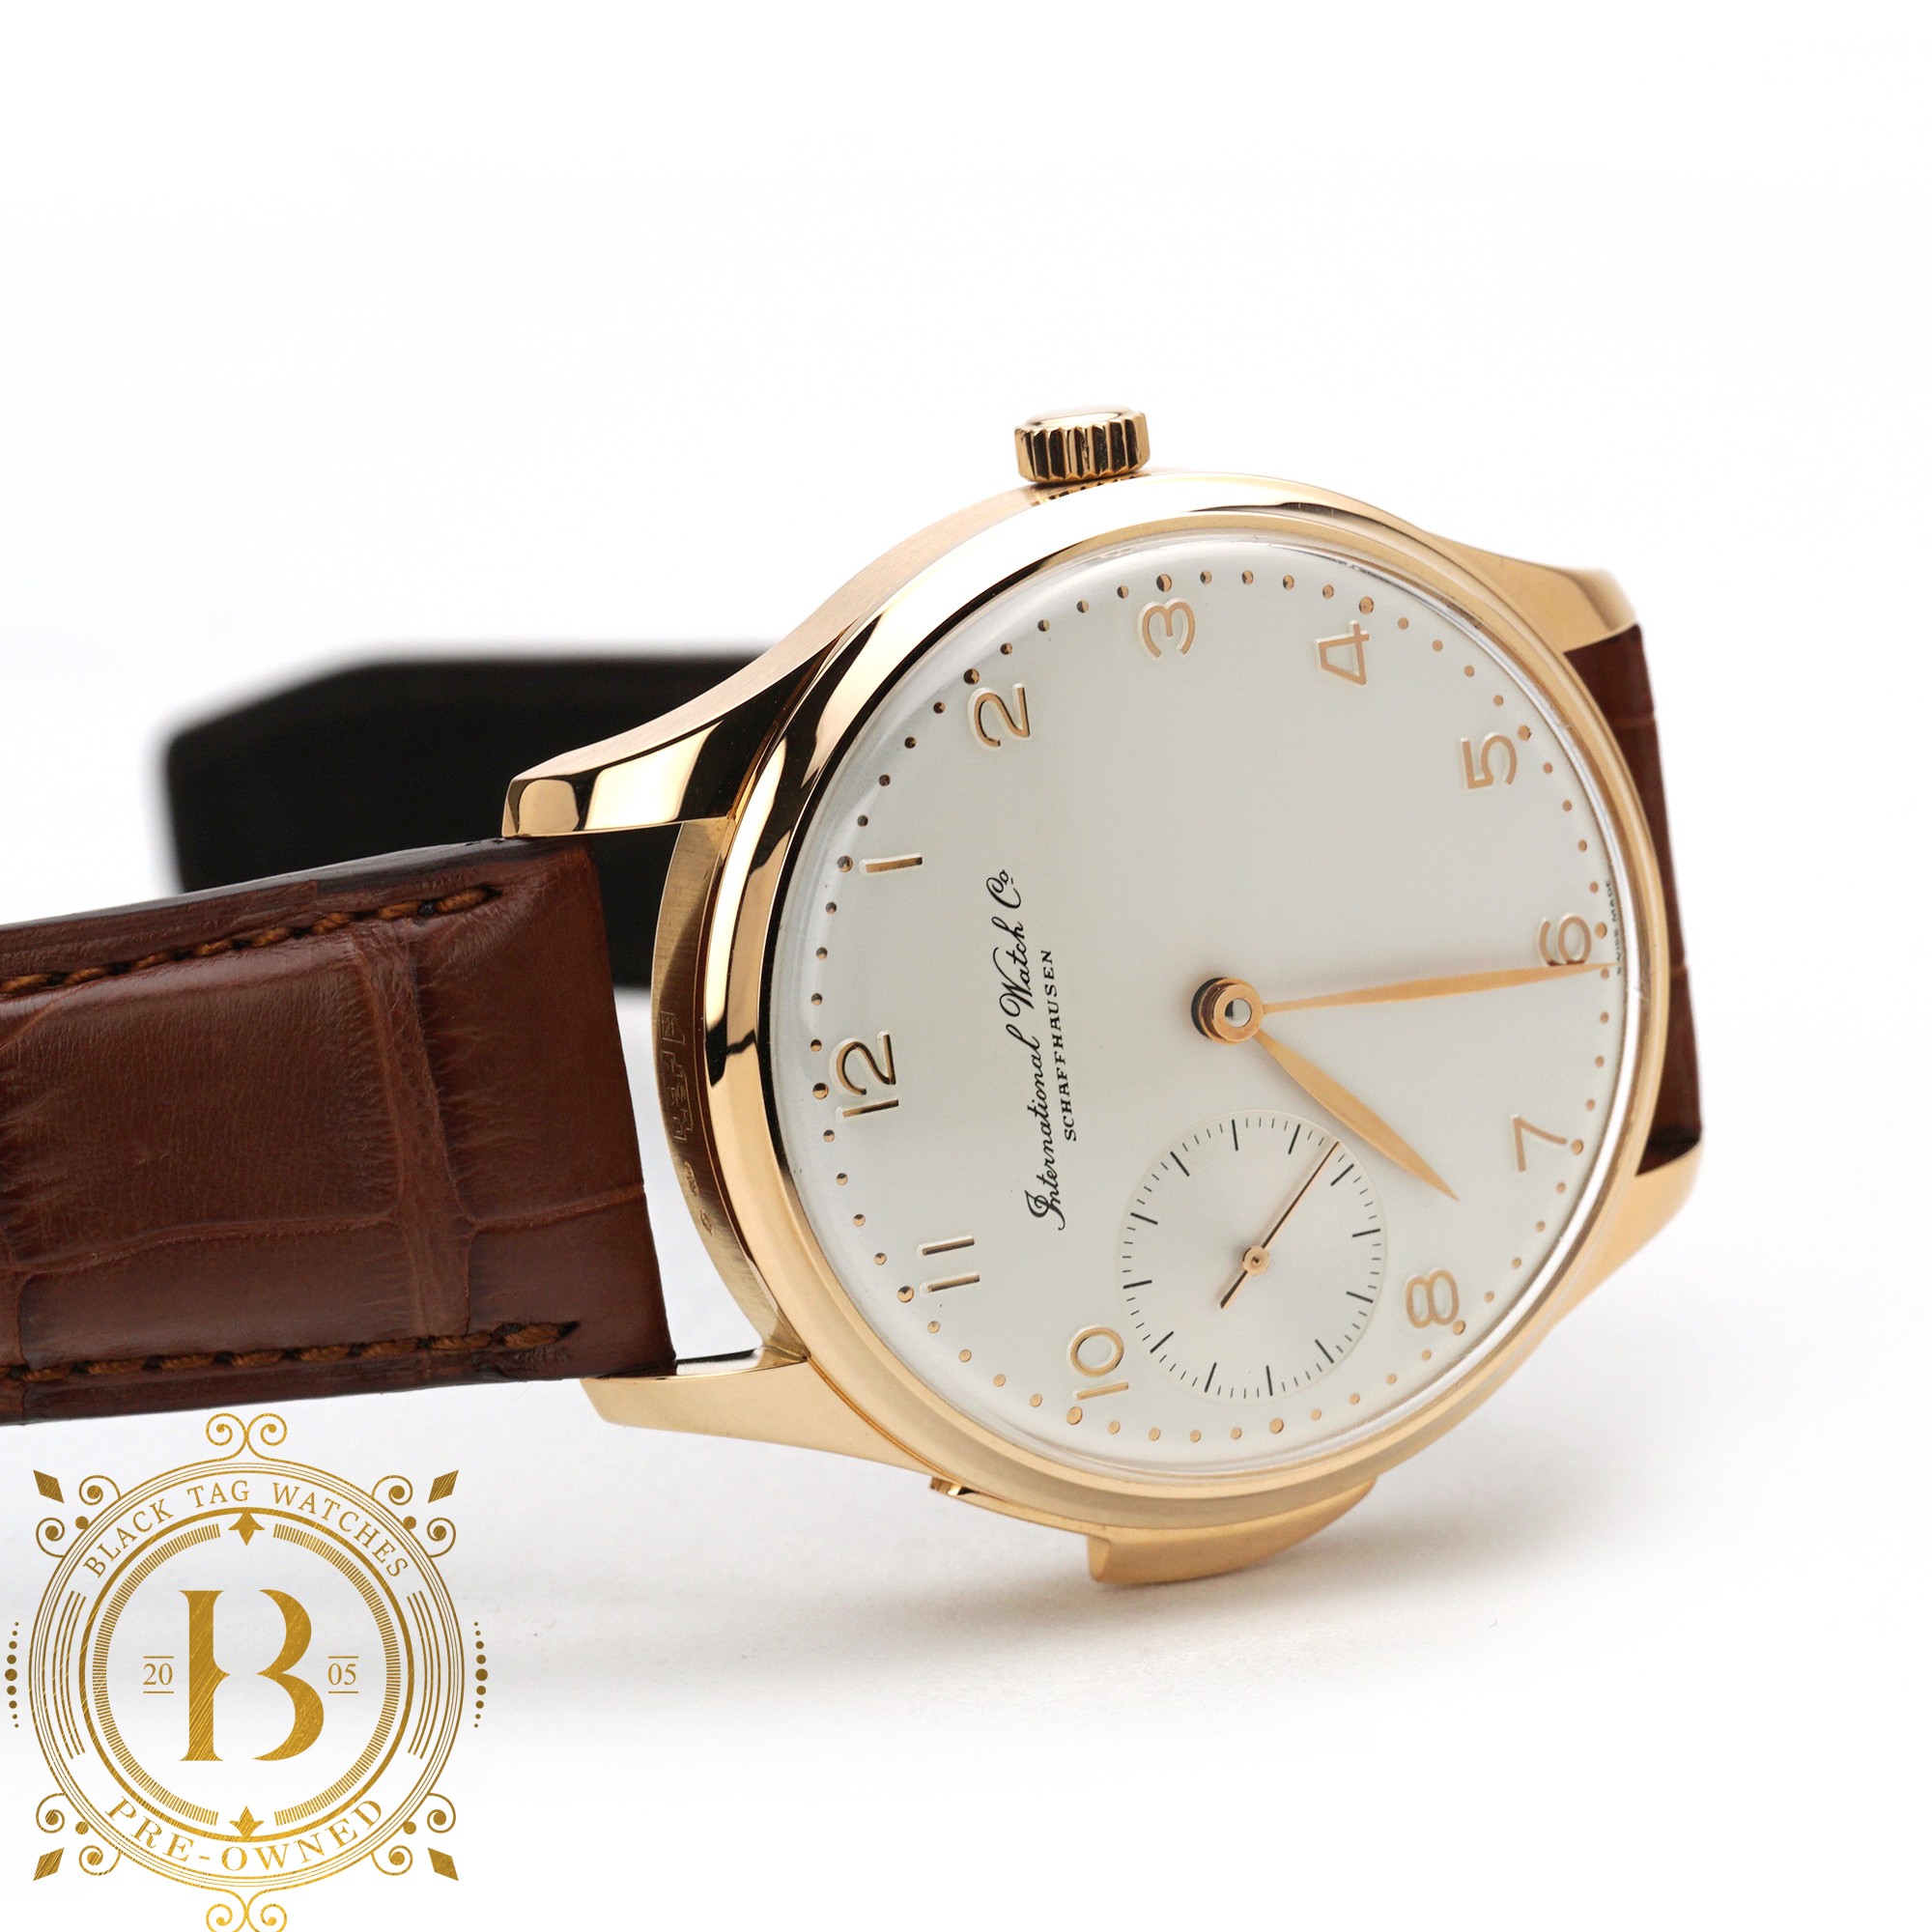 tåge Rindende Forbandet IWC Portugieser Minute Repeater Rose Gold Silver Dial IW524005 for $35,000  • Black Tag Watches Pre-Owned